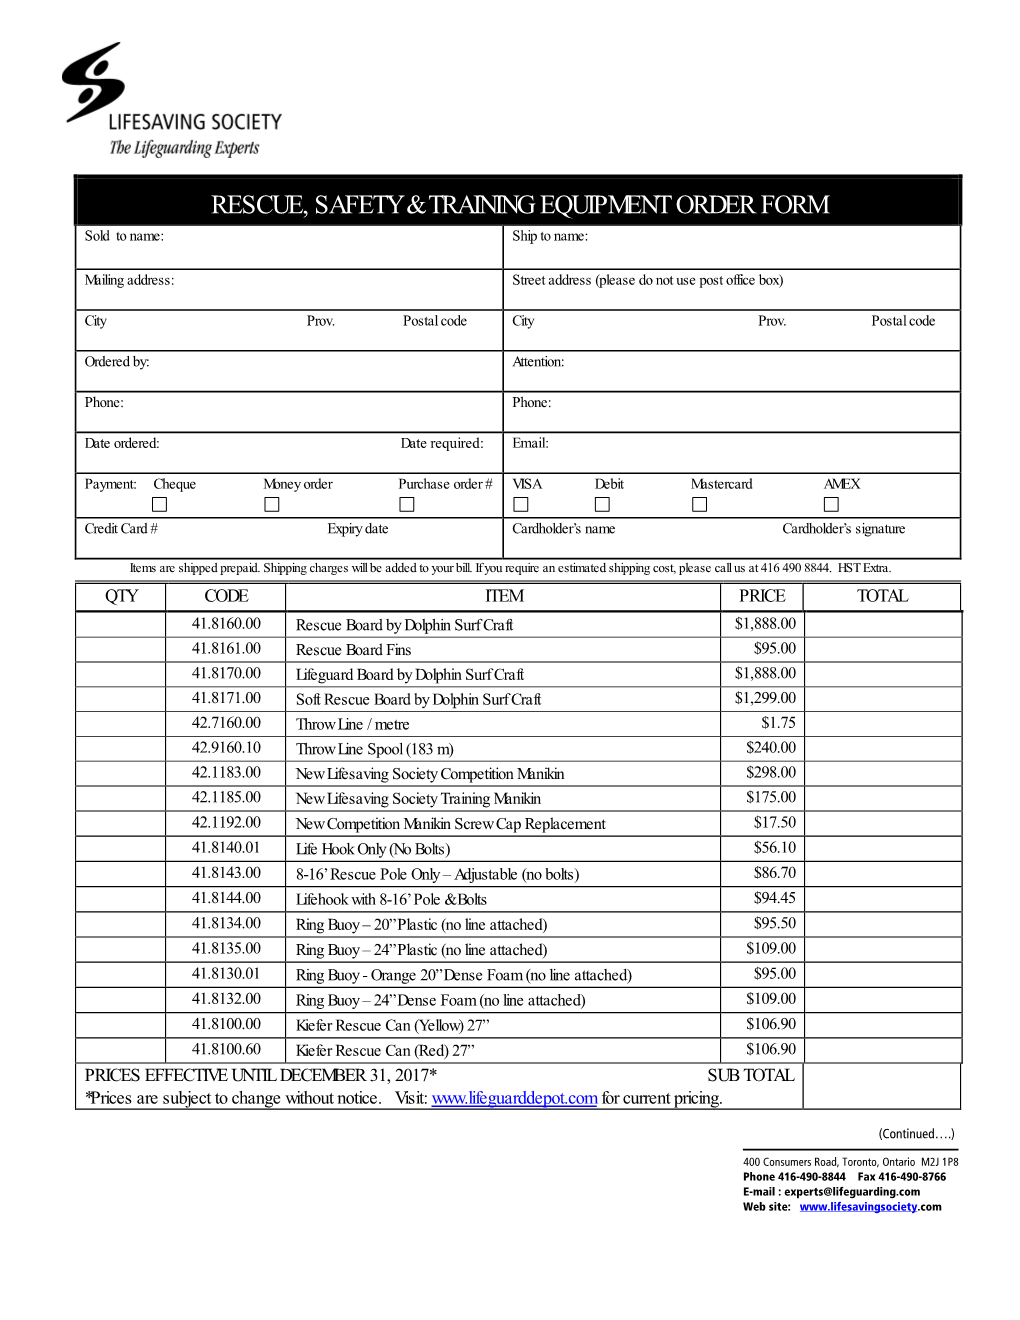 Rescue, Safety & Training Equipment Order Form